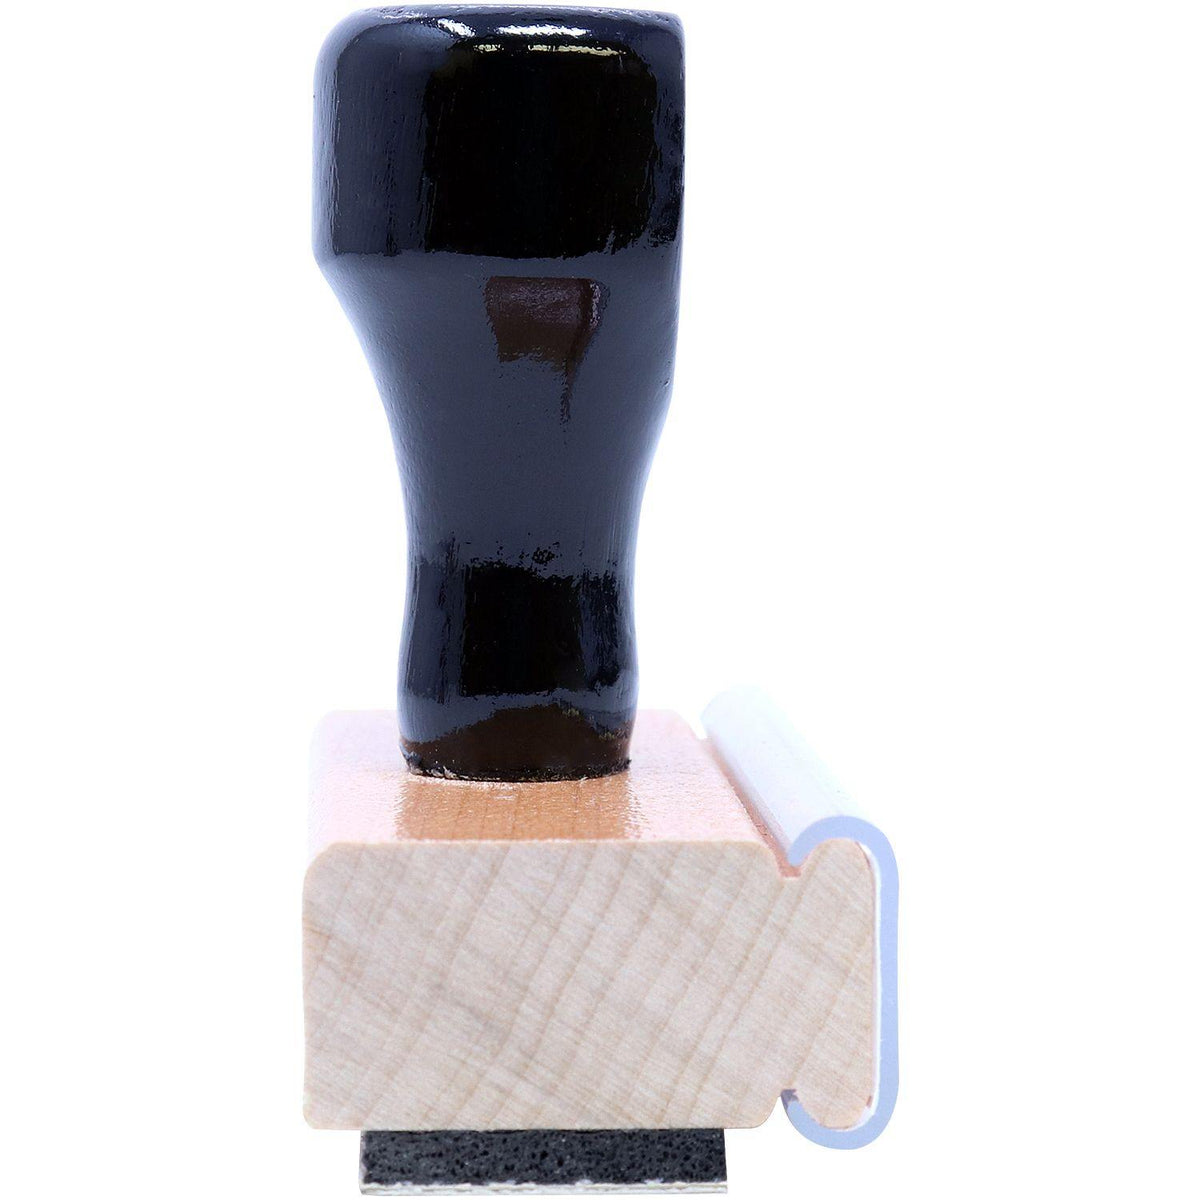 Side View of Large Important Rubber Stamp